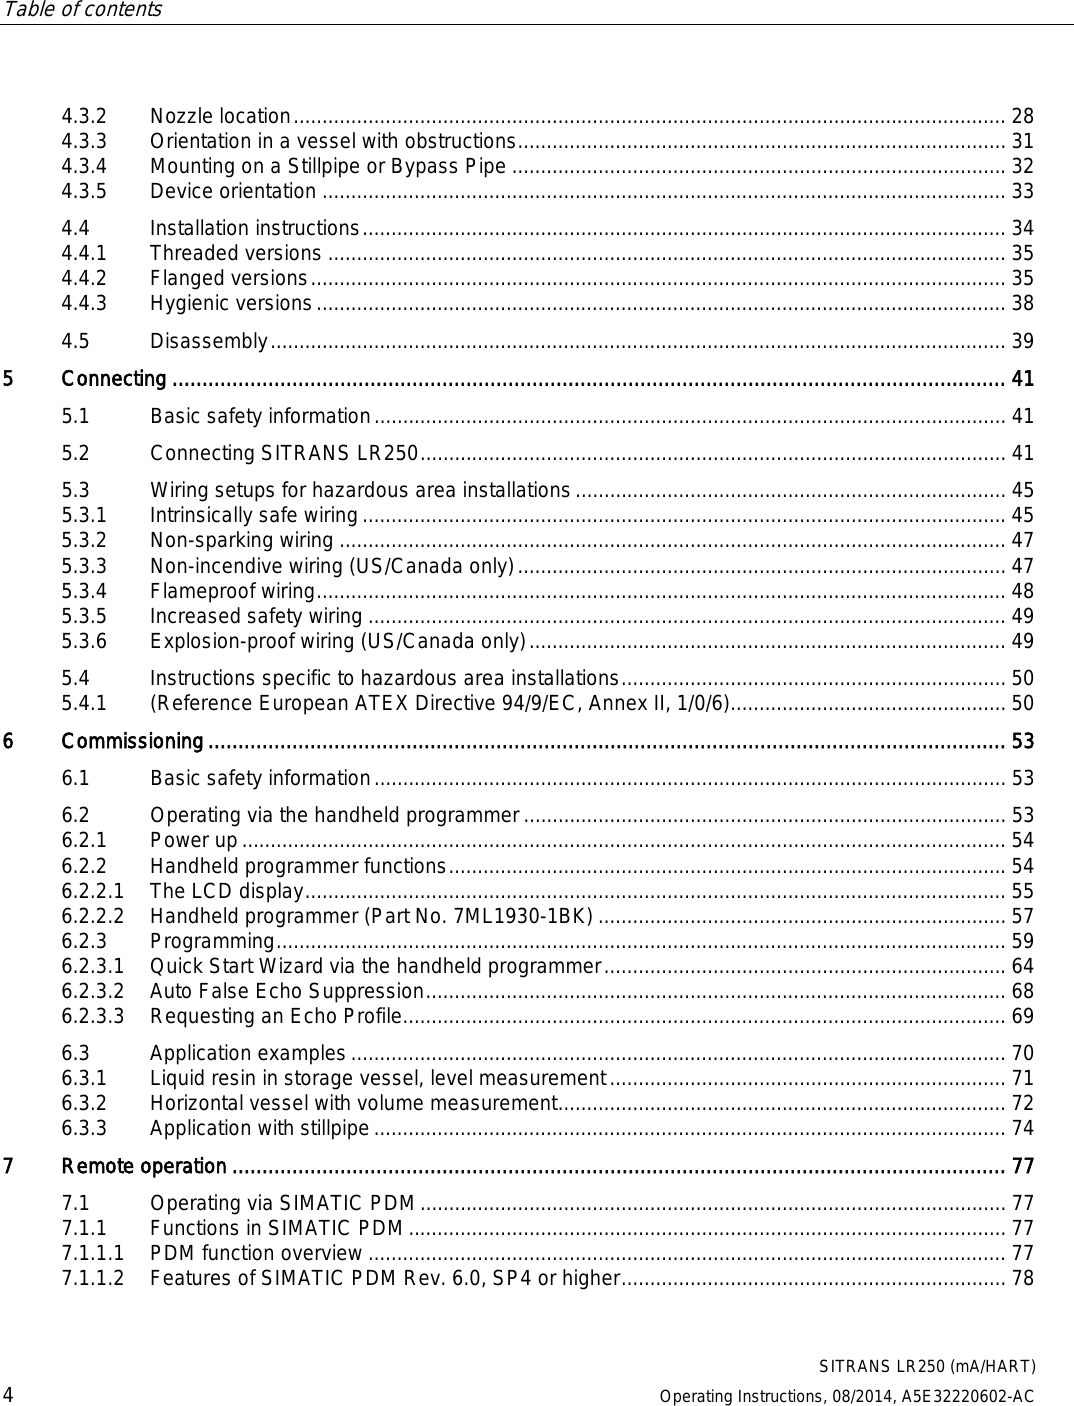 Table of contents      SITRANS LR250 (mA/HART) 4 Operating Instructions, 08/2014, A5E32220602-AC 4.3.2 Nozzle location ............................................................................................................................ 28 4.3.3 Orientation in a vessel with obstructions ..................................................................................... 31 4.3.4 Mounting on a Stillpipe or Bypass Pipe ...................................................................................... 32 4.3.5 Device orientation ....................................................................................................................... 33 4.4 Installation instructions ................................................................................................................ 34 4.4.1 Threaded versions ...................................................................................................................... 35 4.4.2 Flanged versions ......................................................................................................................... 35 4.4.3 Hygienic versions ........................................................................................................................ 38 4.5 Disassembly ................................................................................................................................ 39 5  Connecting ........................................................................................................................................... 41 5.1 Basic safety information .............................................................................................................. 41 5.2 Connecting SITRANS LR250 ...................................................................................................... 41 5.3 Wiring setups for hazardous area installations ........................................................................... 45 5.3.1 Intrinsically safe wiring ................................................................................................................ 45 5.3.2 Non-sparking wiring .................................................................................................................... 47 5.3.3 Non-incendive wiring (US/Canada only) ..................................................................................... 47 5.3.4 Flameproof wiring ........................................................................................................................ 48 5.3.5 Increased safety wiring ............................................................................................................... 49 5.3.6 Explosion-proof wiring (US/Canada only) ................................................................................... 49 5.4 Instructions specific to hazardous area installations ................................................................... 50 5.4.1 (Reference European ATEX Directive 94/9/EC, Annex II, 1/0/6)................................................ 50 6  Commissioning ..................................................................................................................................... 53 6.1 Basic safety information .............................................................................................................. 53 6.2 Operating via the handheld programmer .................................................................................... 53 6.2.1 Power up ..................................................................................................................................... 54 6.2.2 Handheld programmer functions ................................................................................................. 54 6.2.2.1 The LCD display .......................................................................................................................... 55 6.2.2.2 Handheld programmer (Part No. 7ML1930-1BK) ....................................................................... 57 6.2.3 Programming ............................................................................................................................... 59 6.2.3.1 Quick Start Wizard via the handheld programmer ...................................................................... 64 6.2.3.2 Auto False Echo Suppression ..................................................................................................... 68 6.2.3.3 Requesting an Echo Profile......................................................................................................... 69 6.3 Application examples .................................................................................................................. 70 6.3.1 Liquid resin in storage vessel, level measurement ..................................................................... 71 6.3.2 Horizontal vessel with volume measurement .............................................................................. 72 6.3.3 Application with stillpipe .............................................................................................................. 74 7  Remote operation ................................................................................................................................. 77 7.1 Operating via SIMATIC PDM ...................................................................................................... 77 7.1.1 Functions in SIMATIC PDM ........................................................................................................ 77 7.1.1.1 PDM function overview ............................................................................................................... 77 7.1.1.2 Features of SIMATIC PDM Rev. 6.0, SP4 or higher ................................................................... 78 